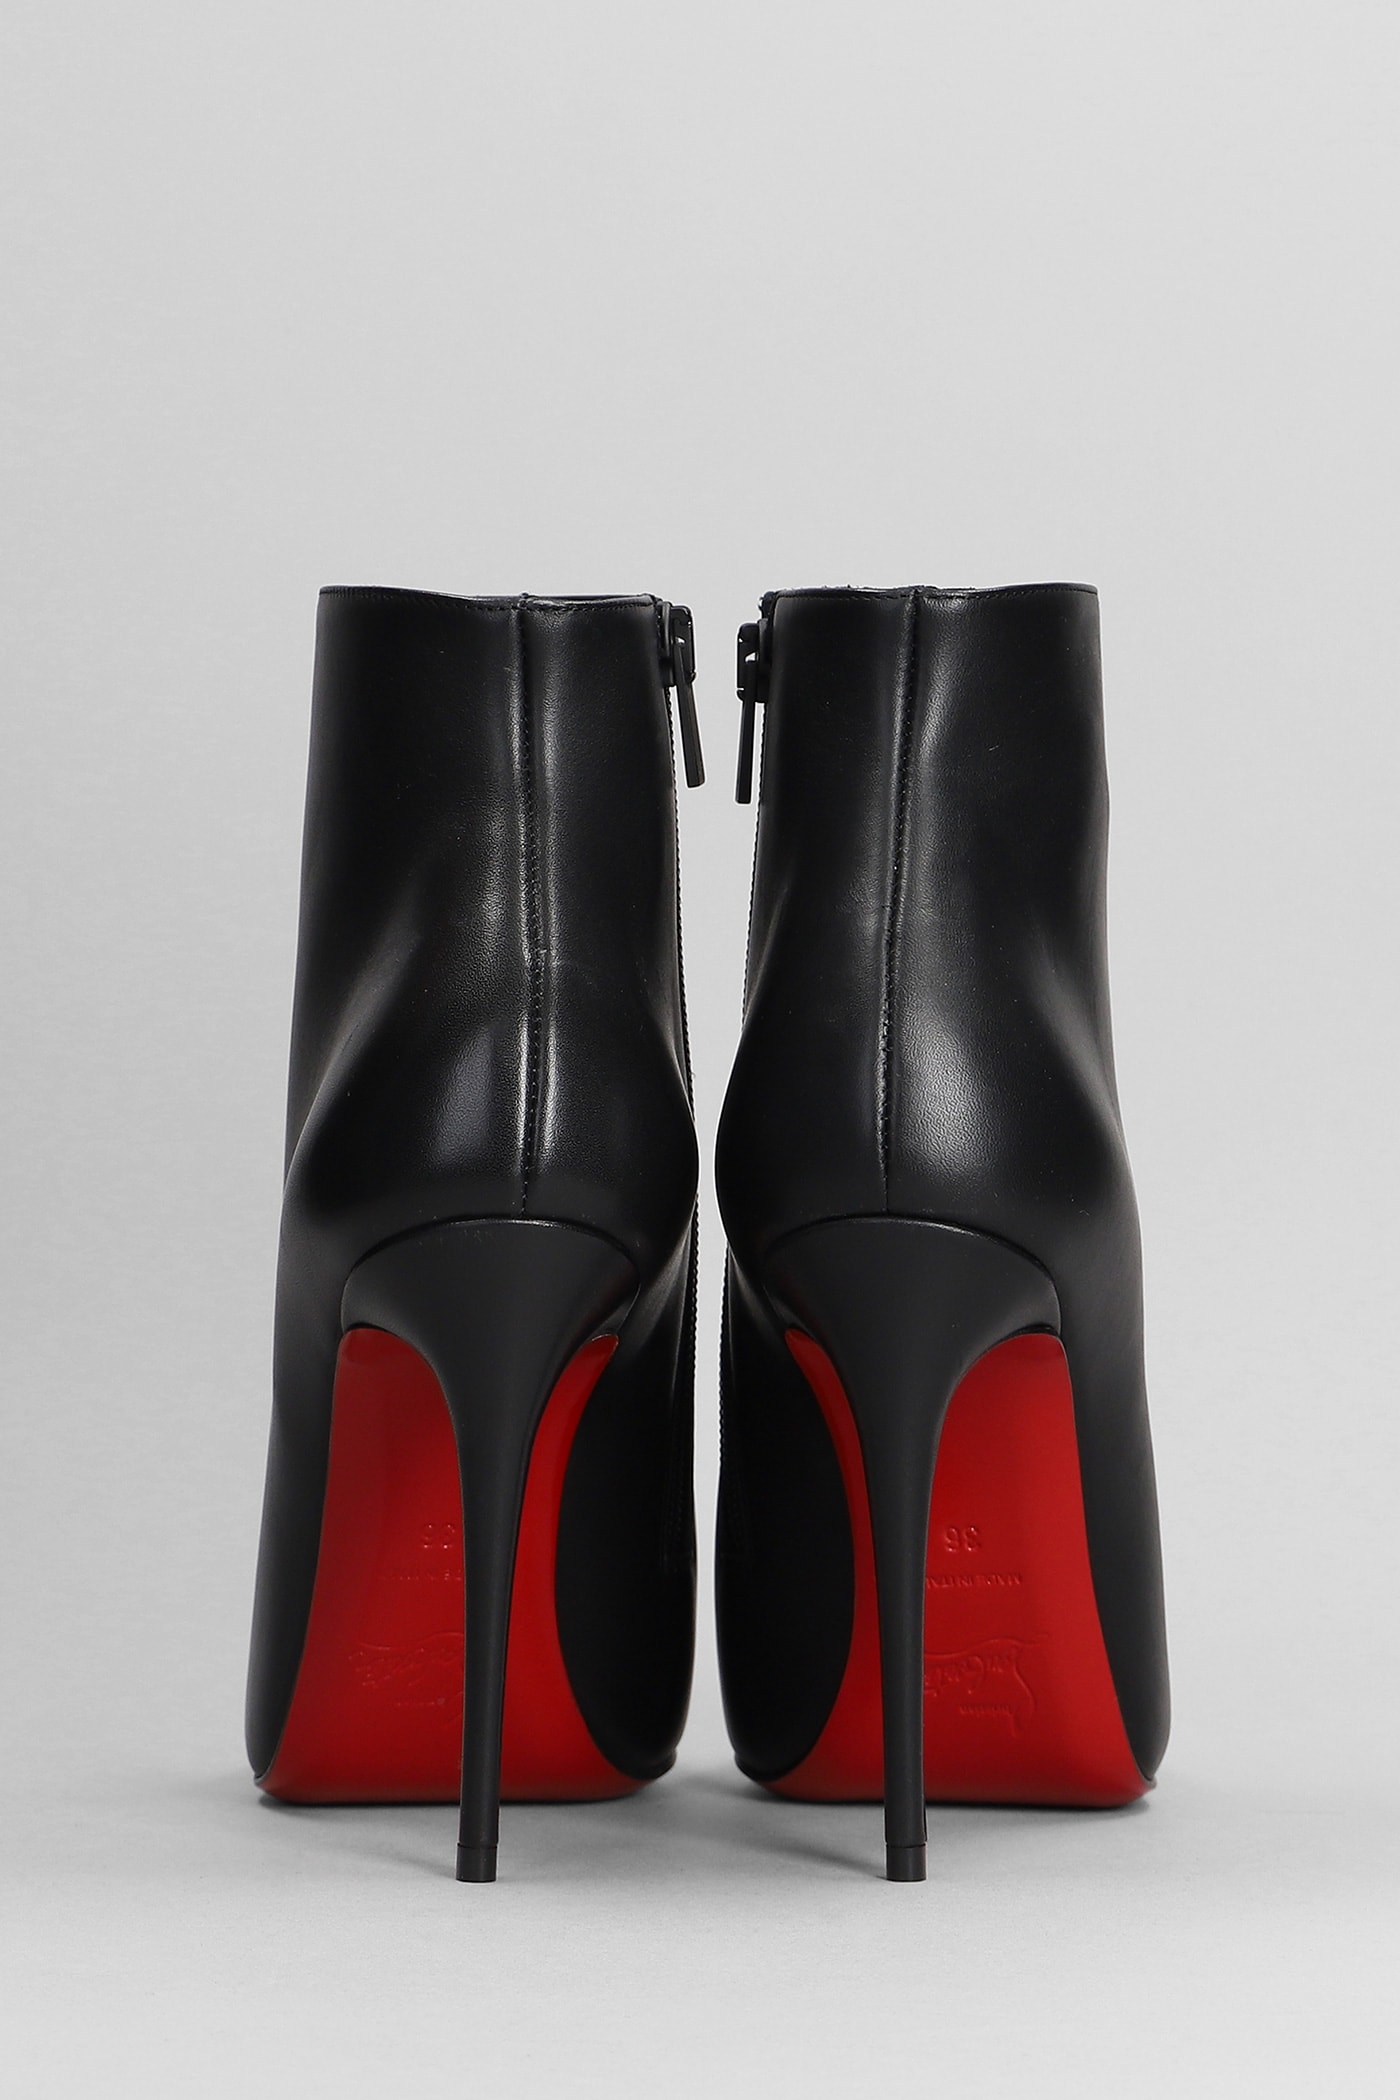 Shop Christian Louboutin So Kate Booty High Heels Ankle Boots In Black Leather